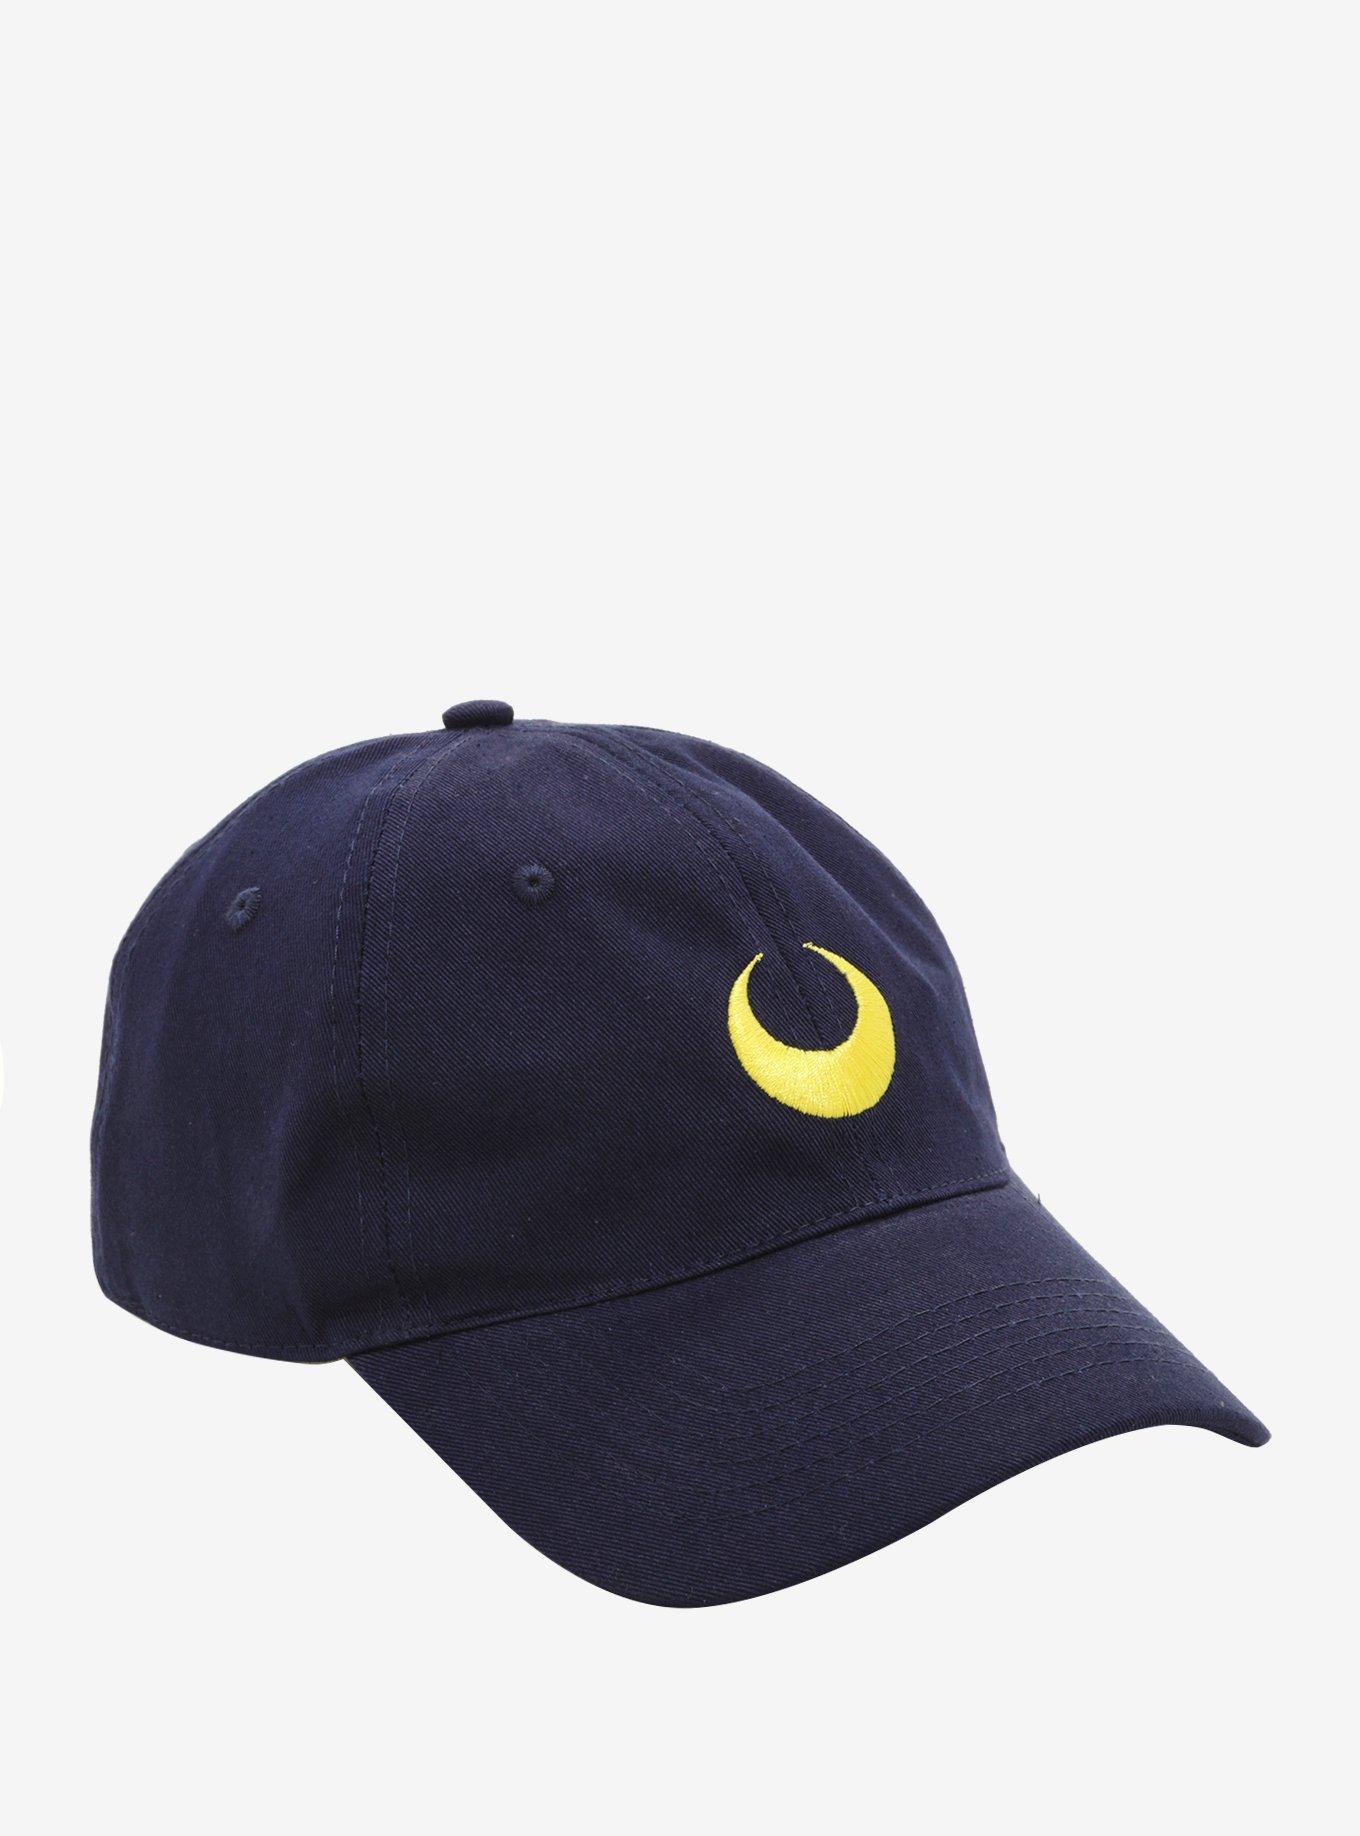 Sailor Moon Crystal Unisex Classic Adjustable Dad Hat for Running Workouts and Outdoor Black Baseball Cap Men Women